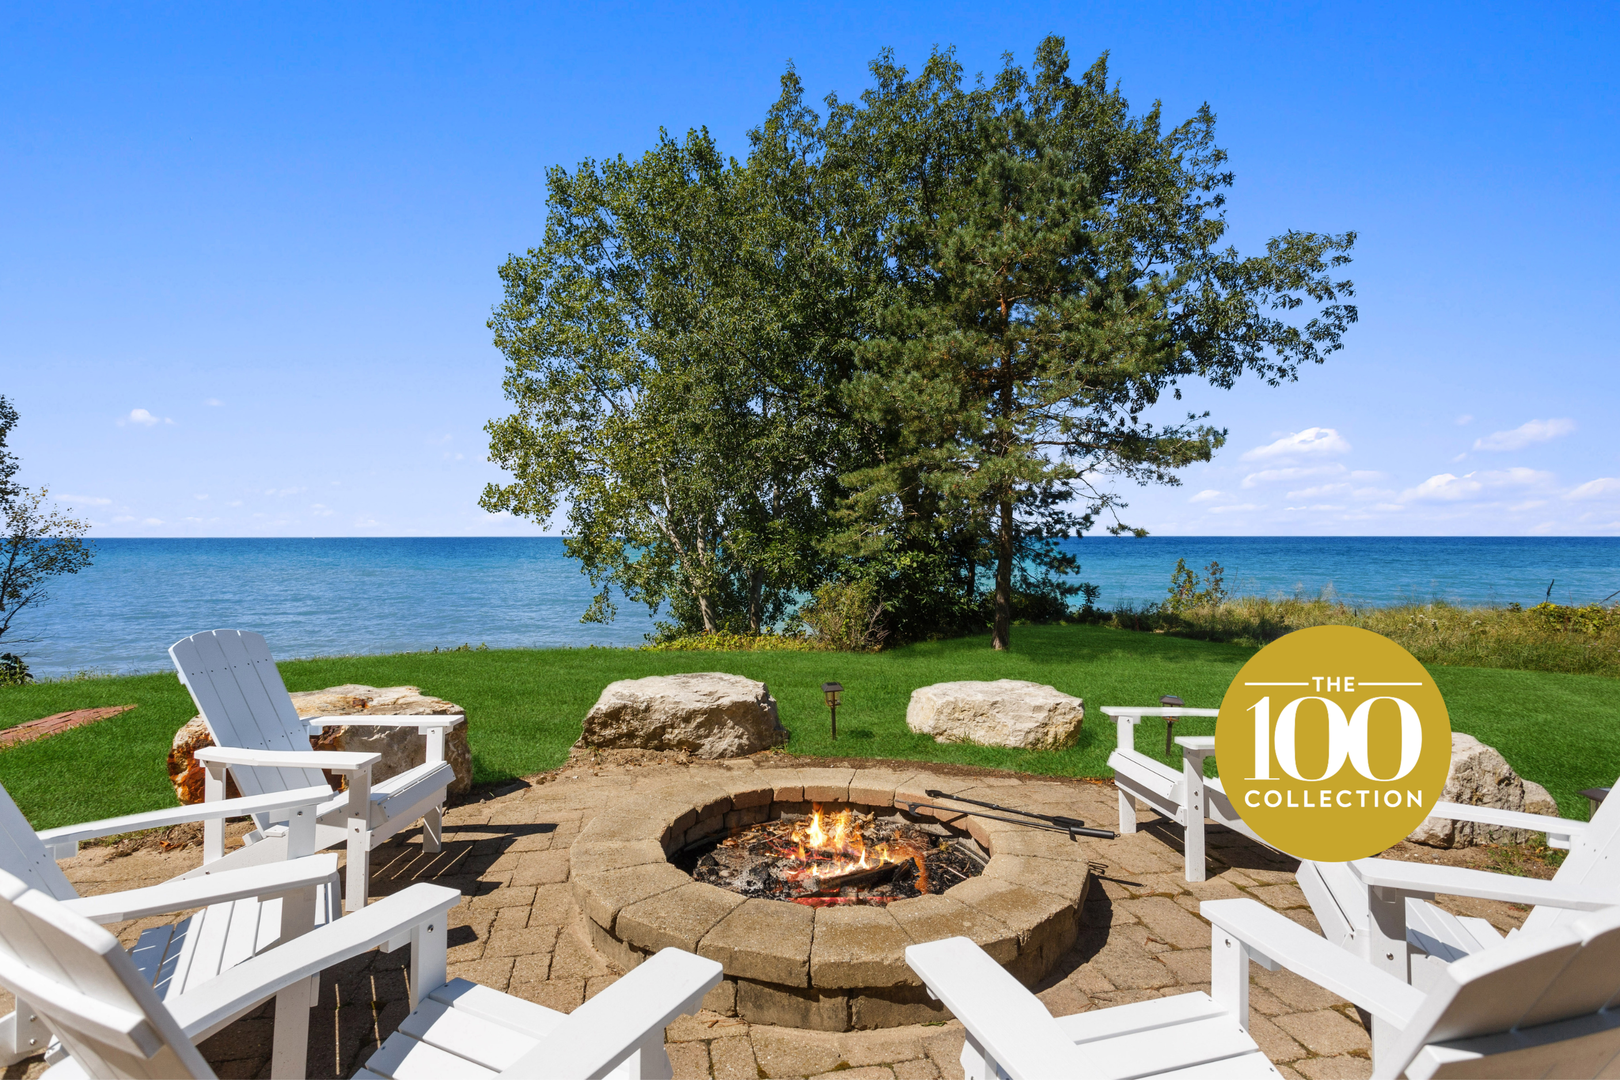 Gather with friends and family around the sandstone patio & firepit overlooking Lake Michigan at Costal Cottage part of the 100 Collection